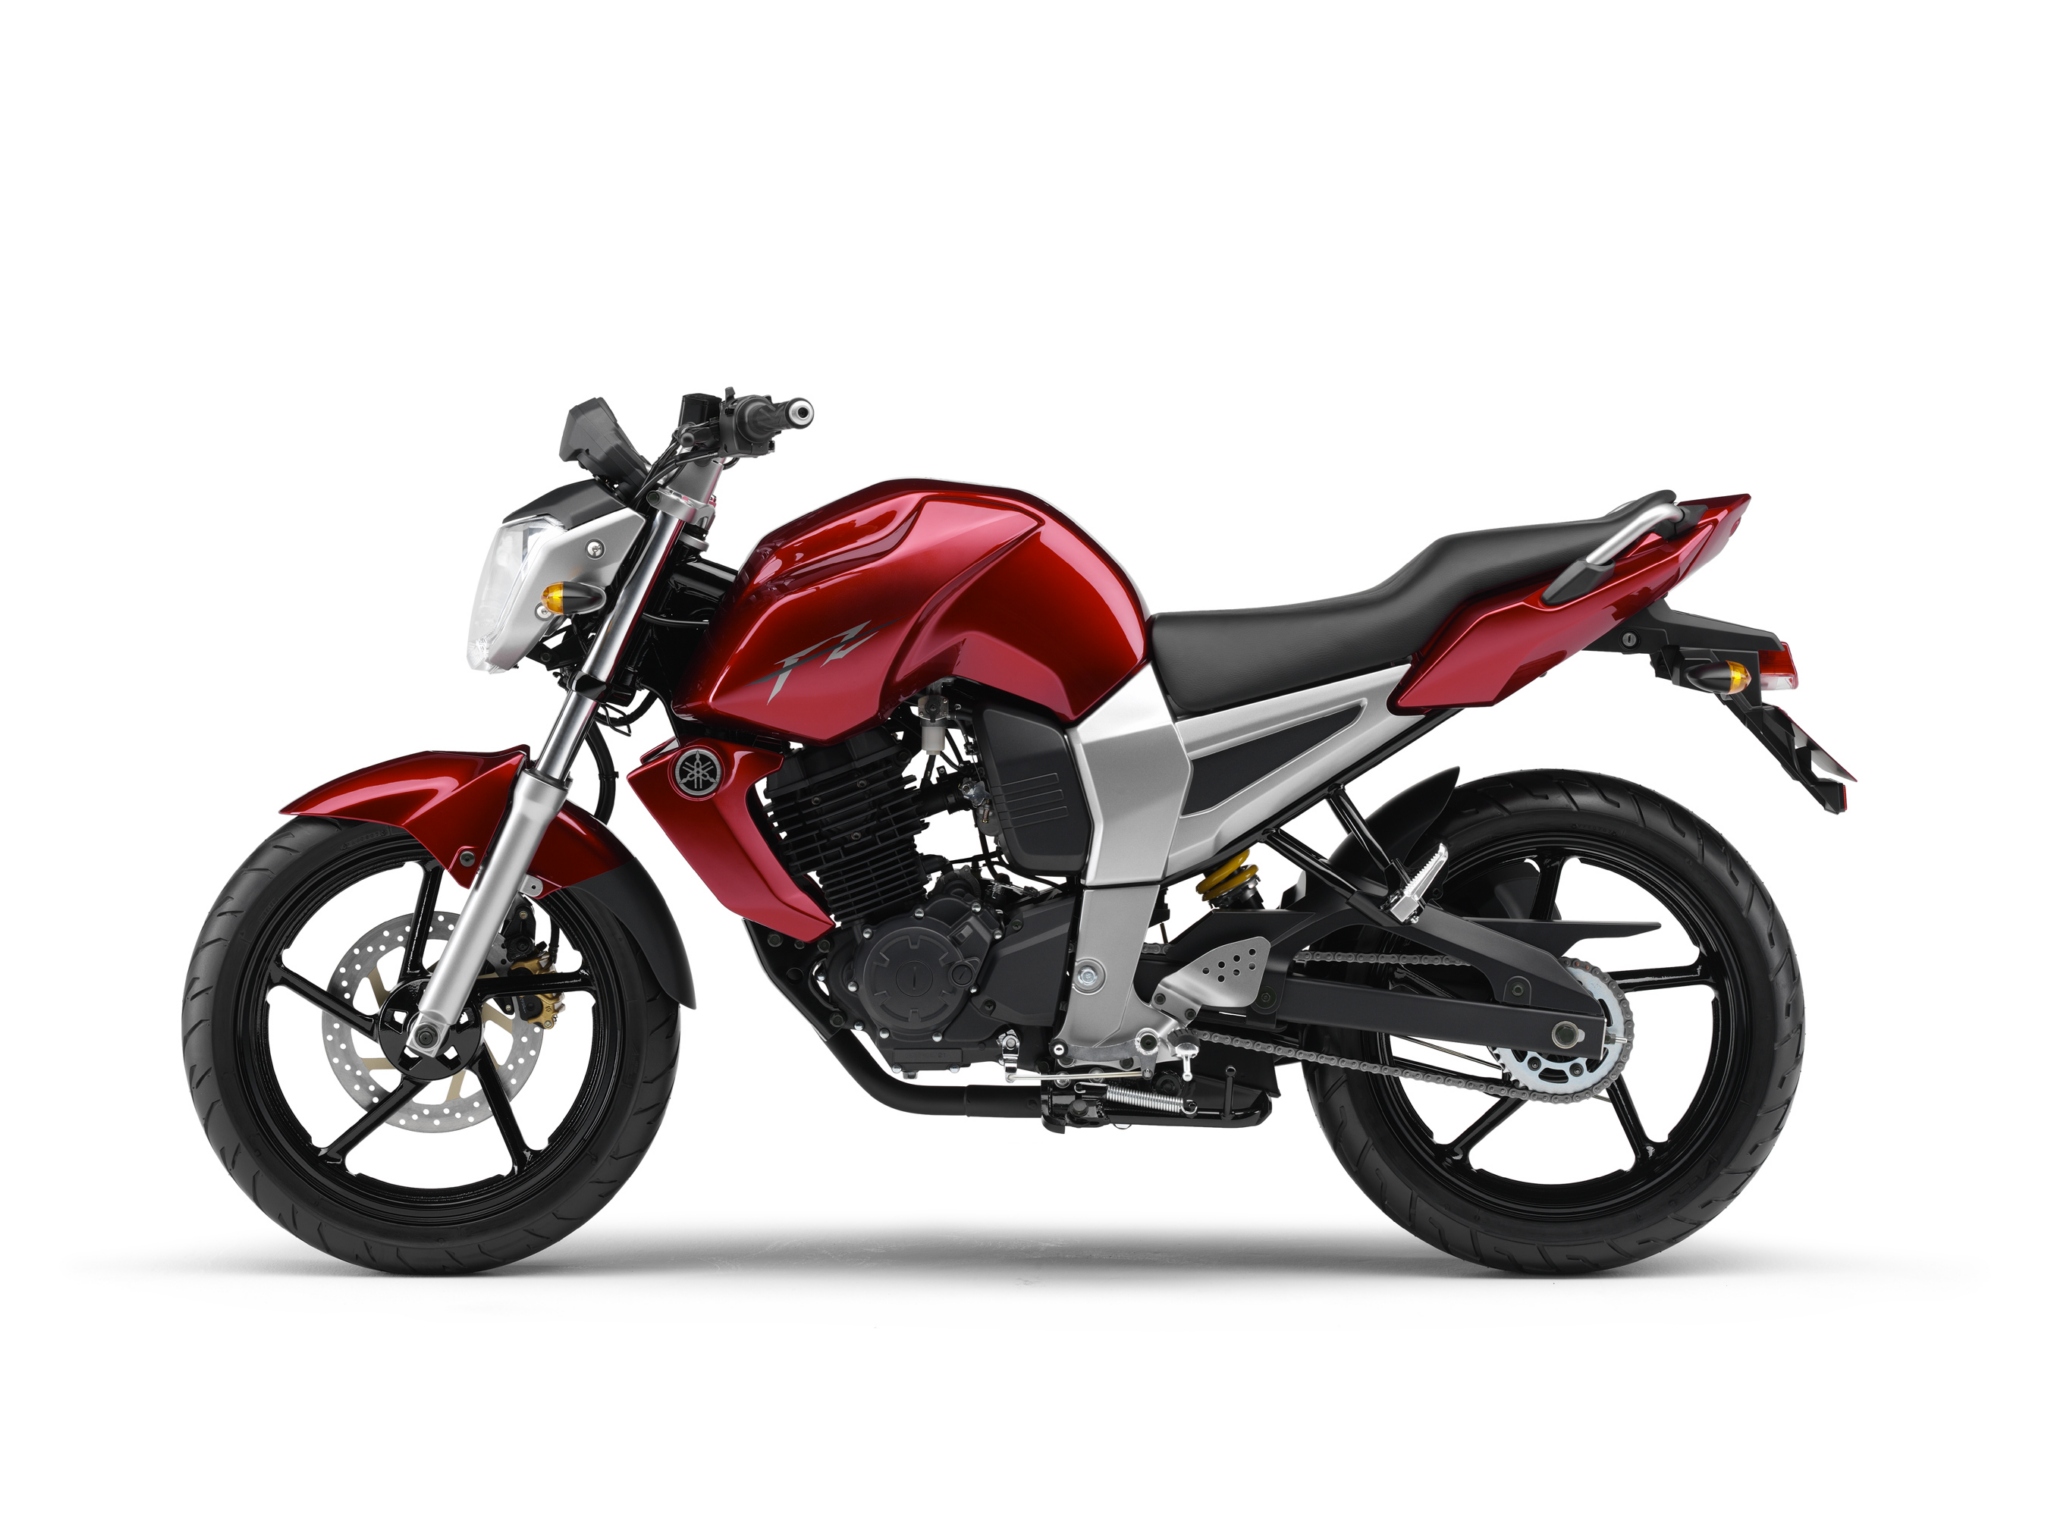 Yamaha Plans to Build Worldwide Models in India ...